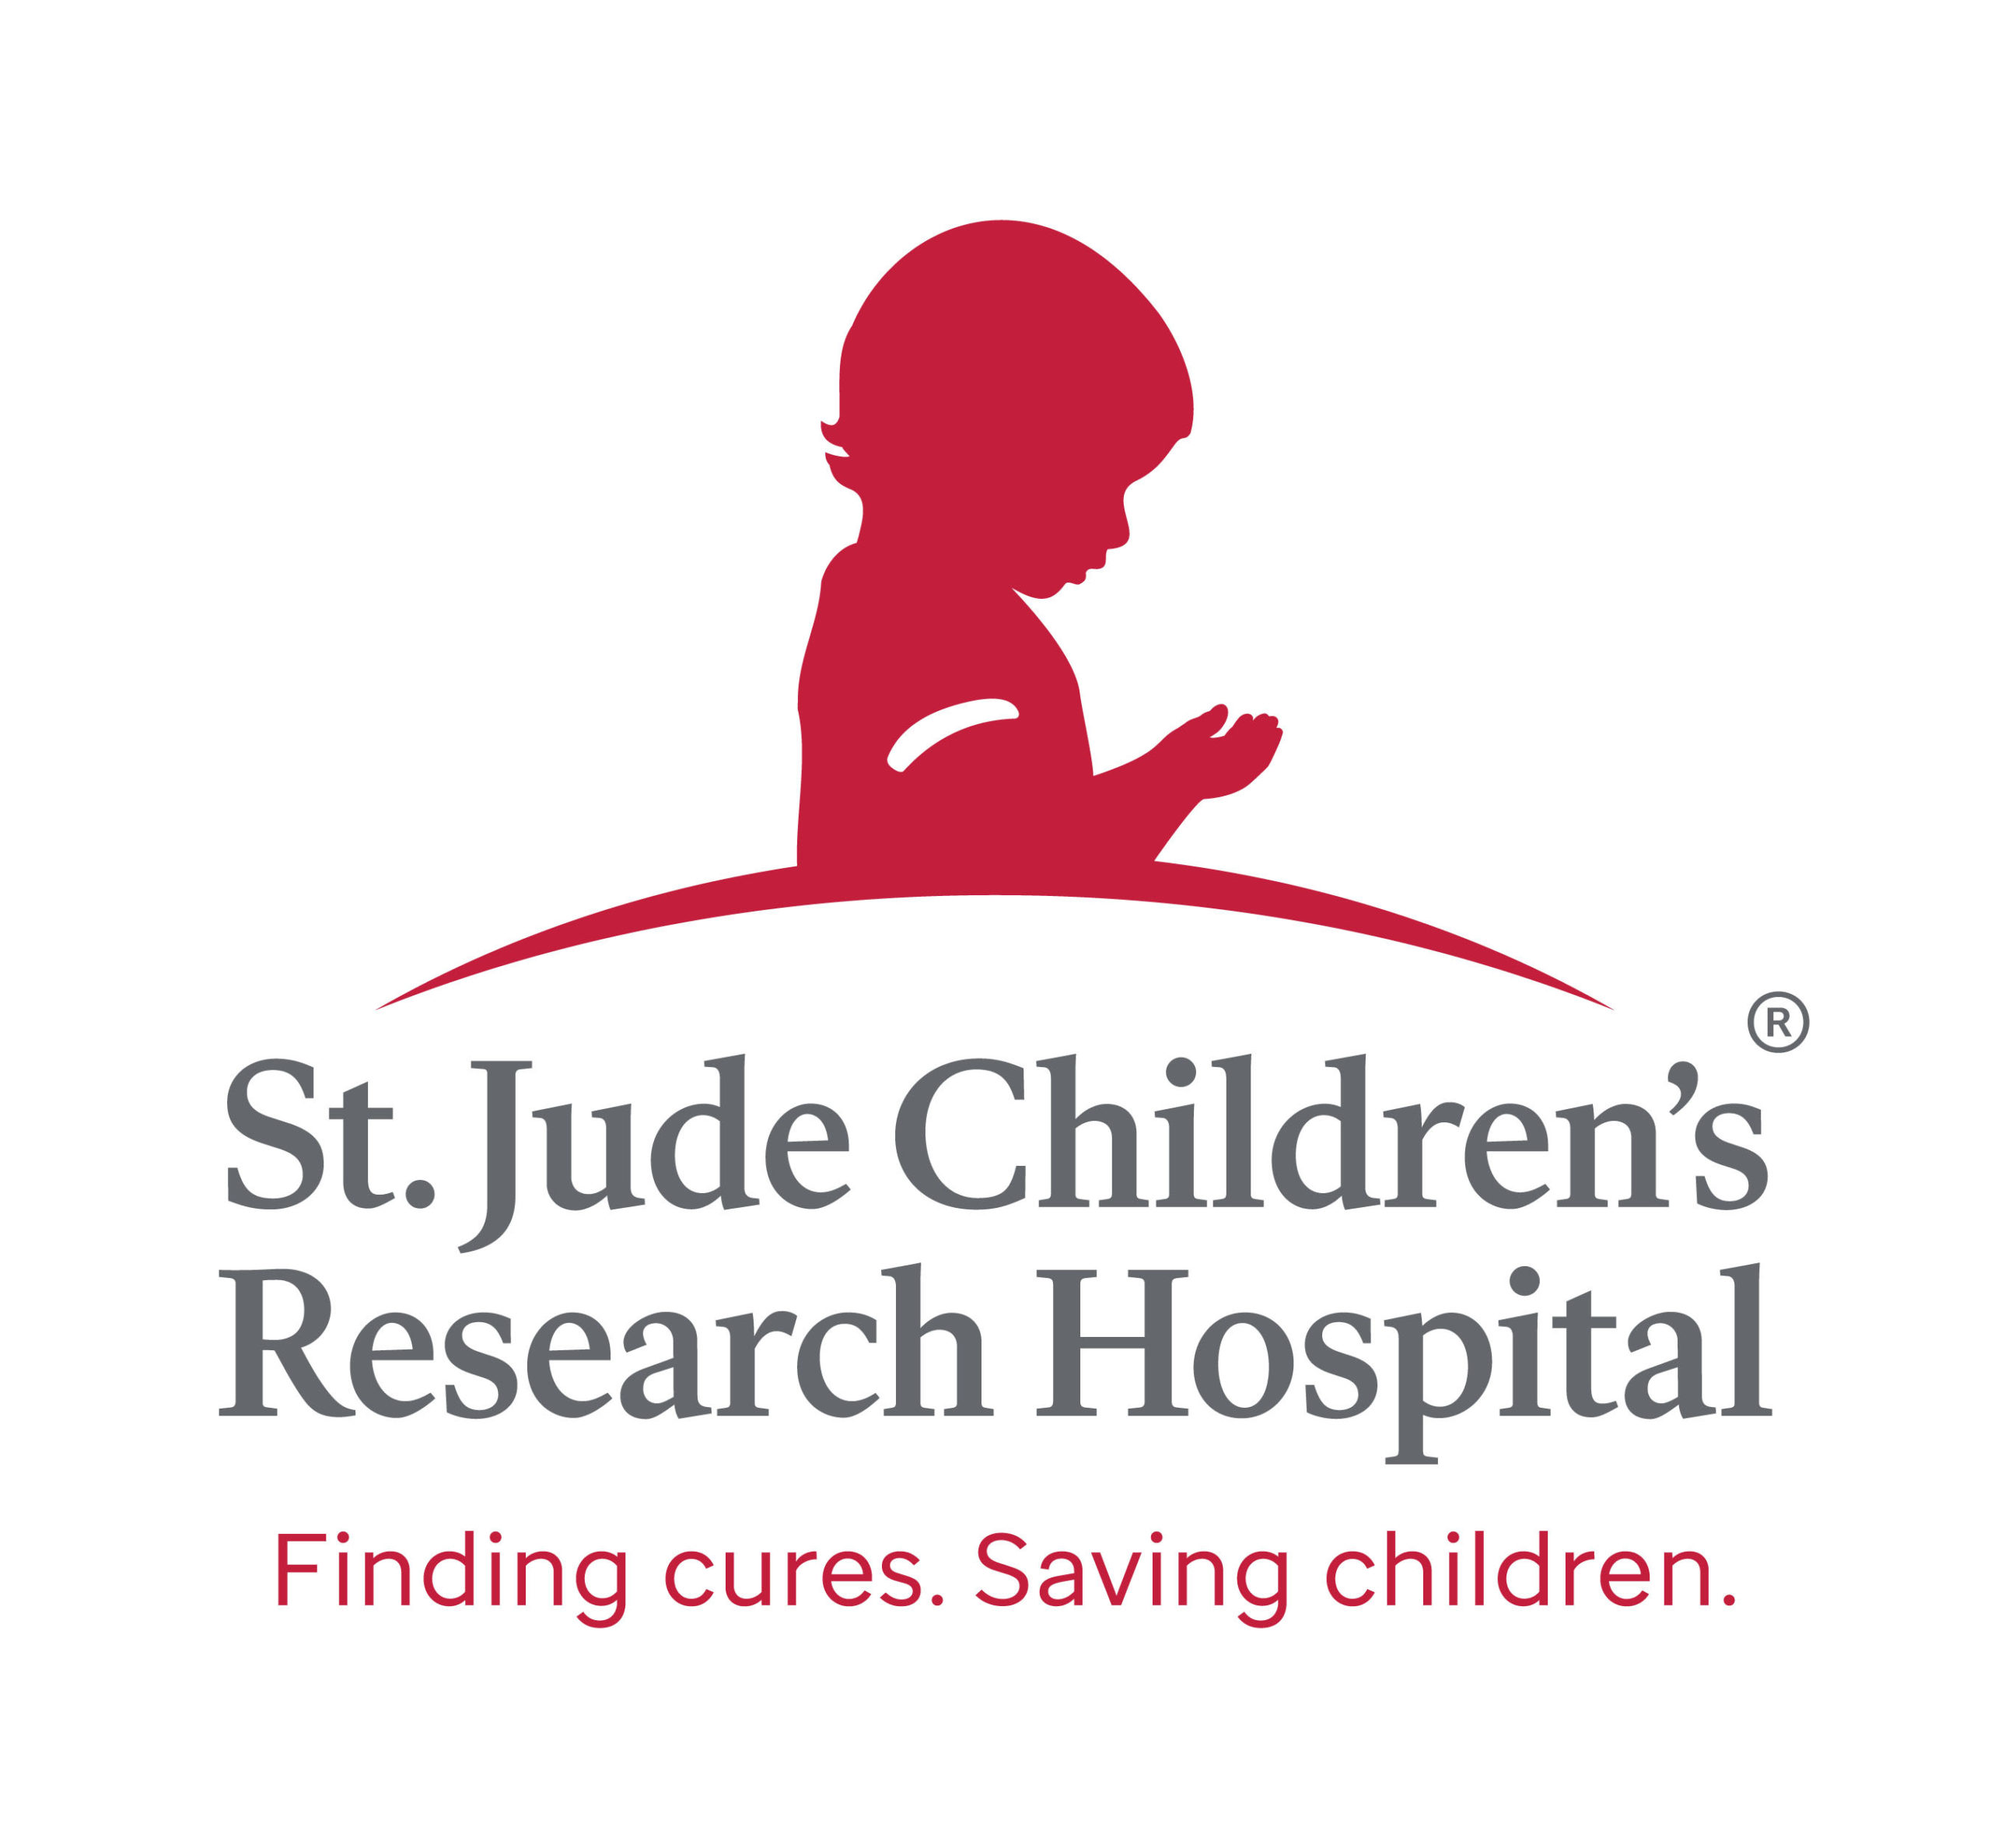 st. jude childrens research hospital